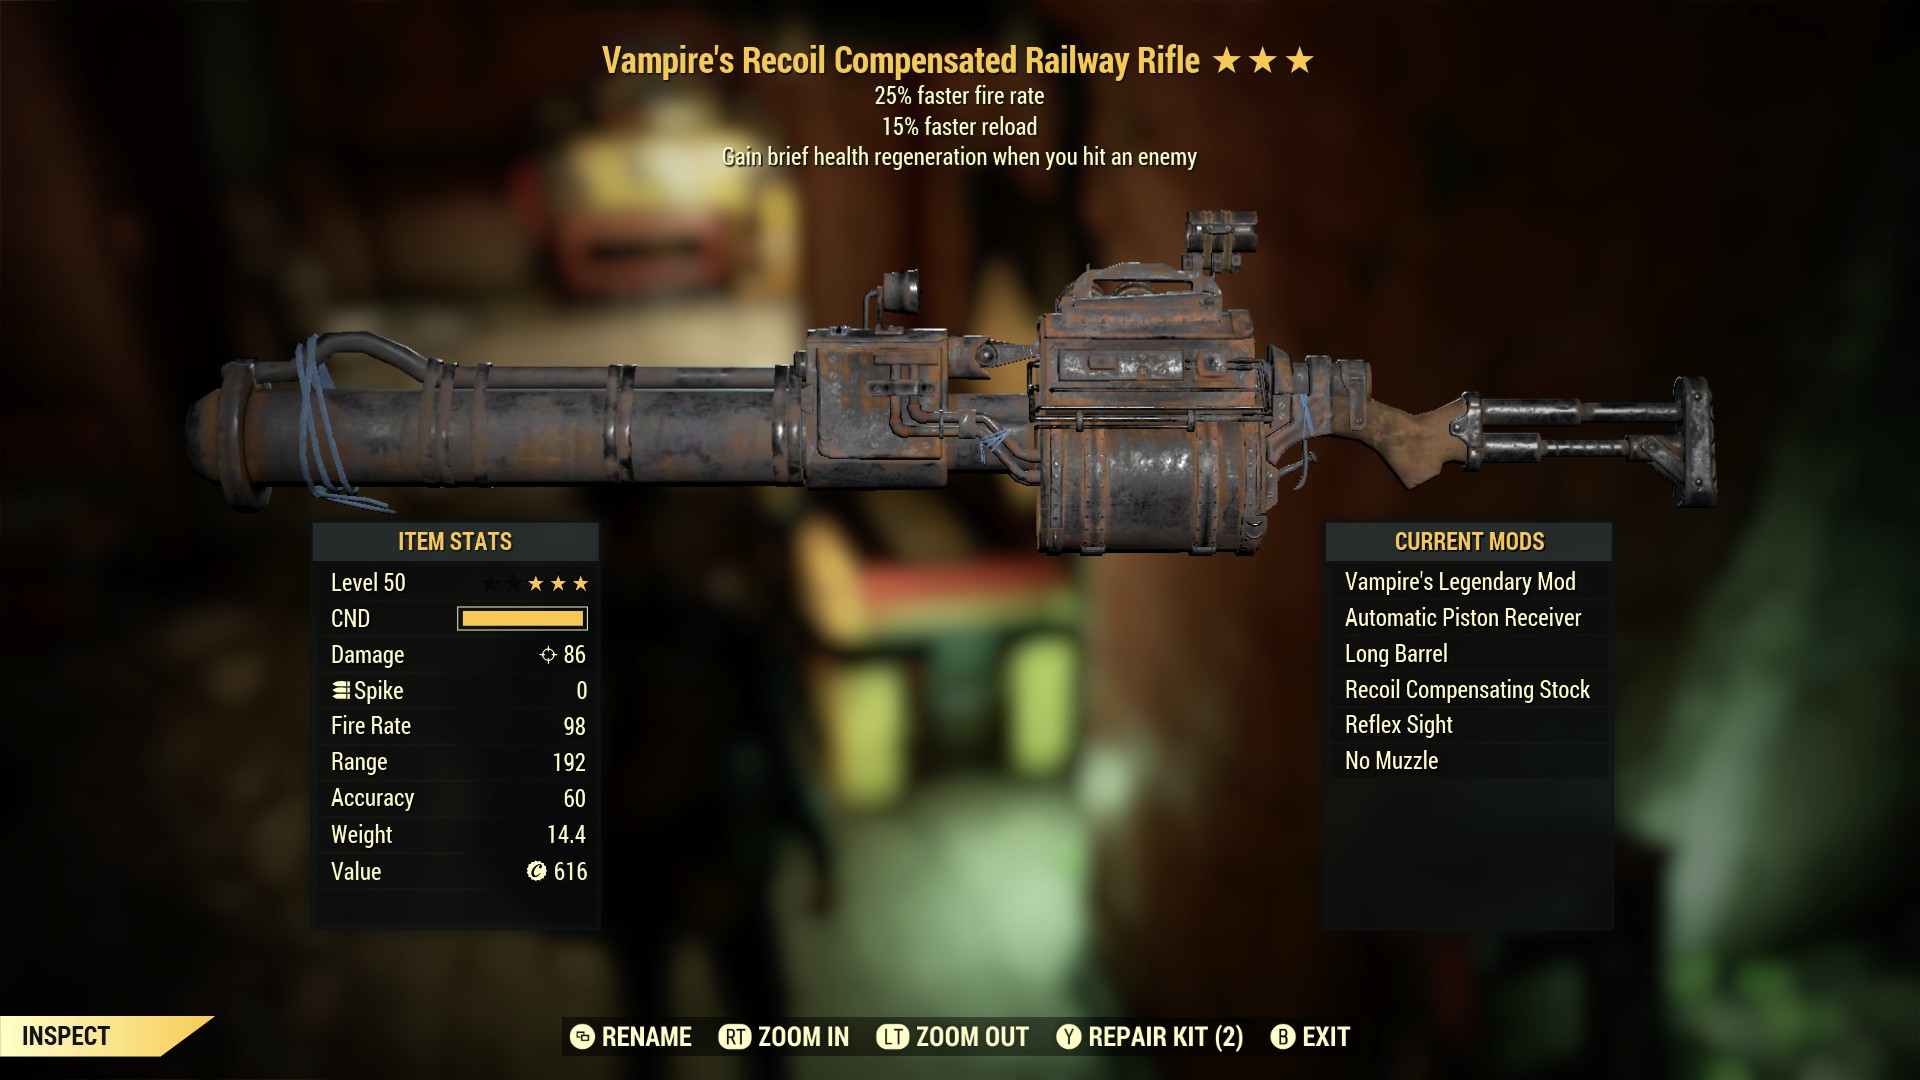 Vampire's Recoil Compensated Railway Rifle